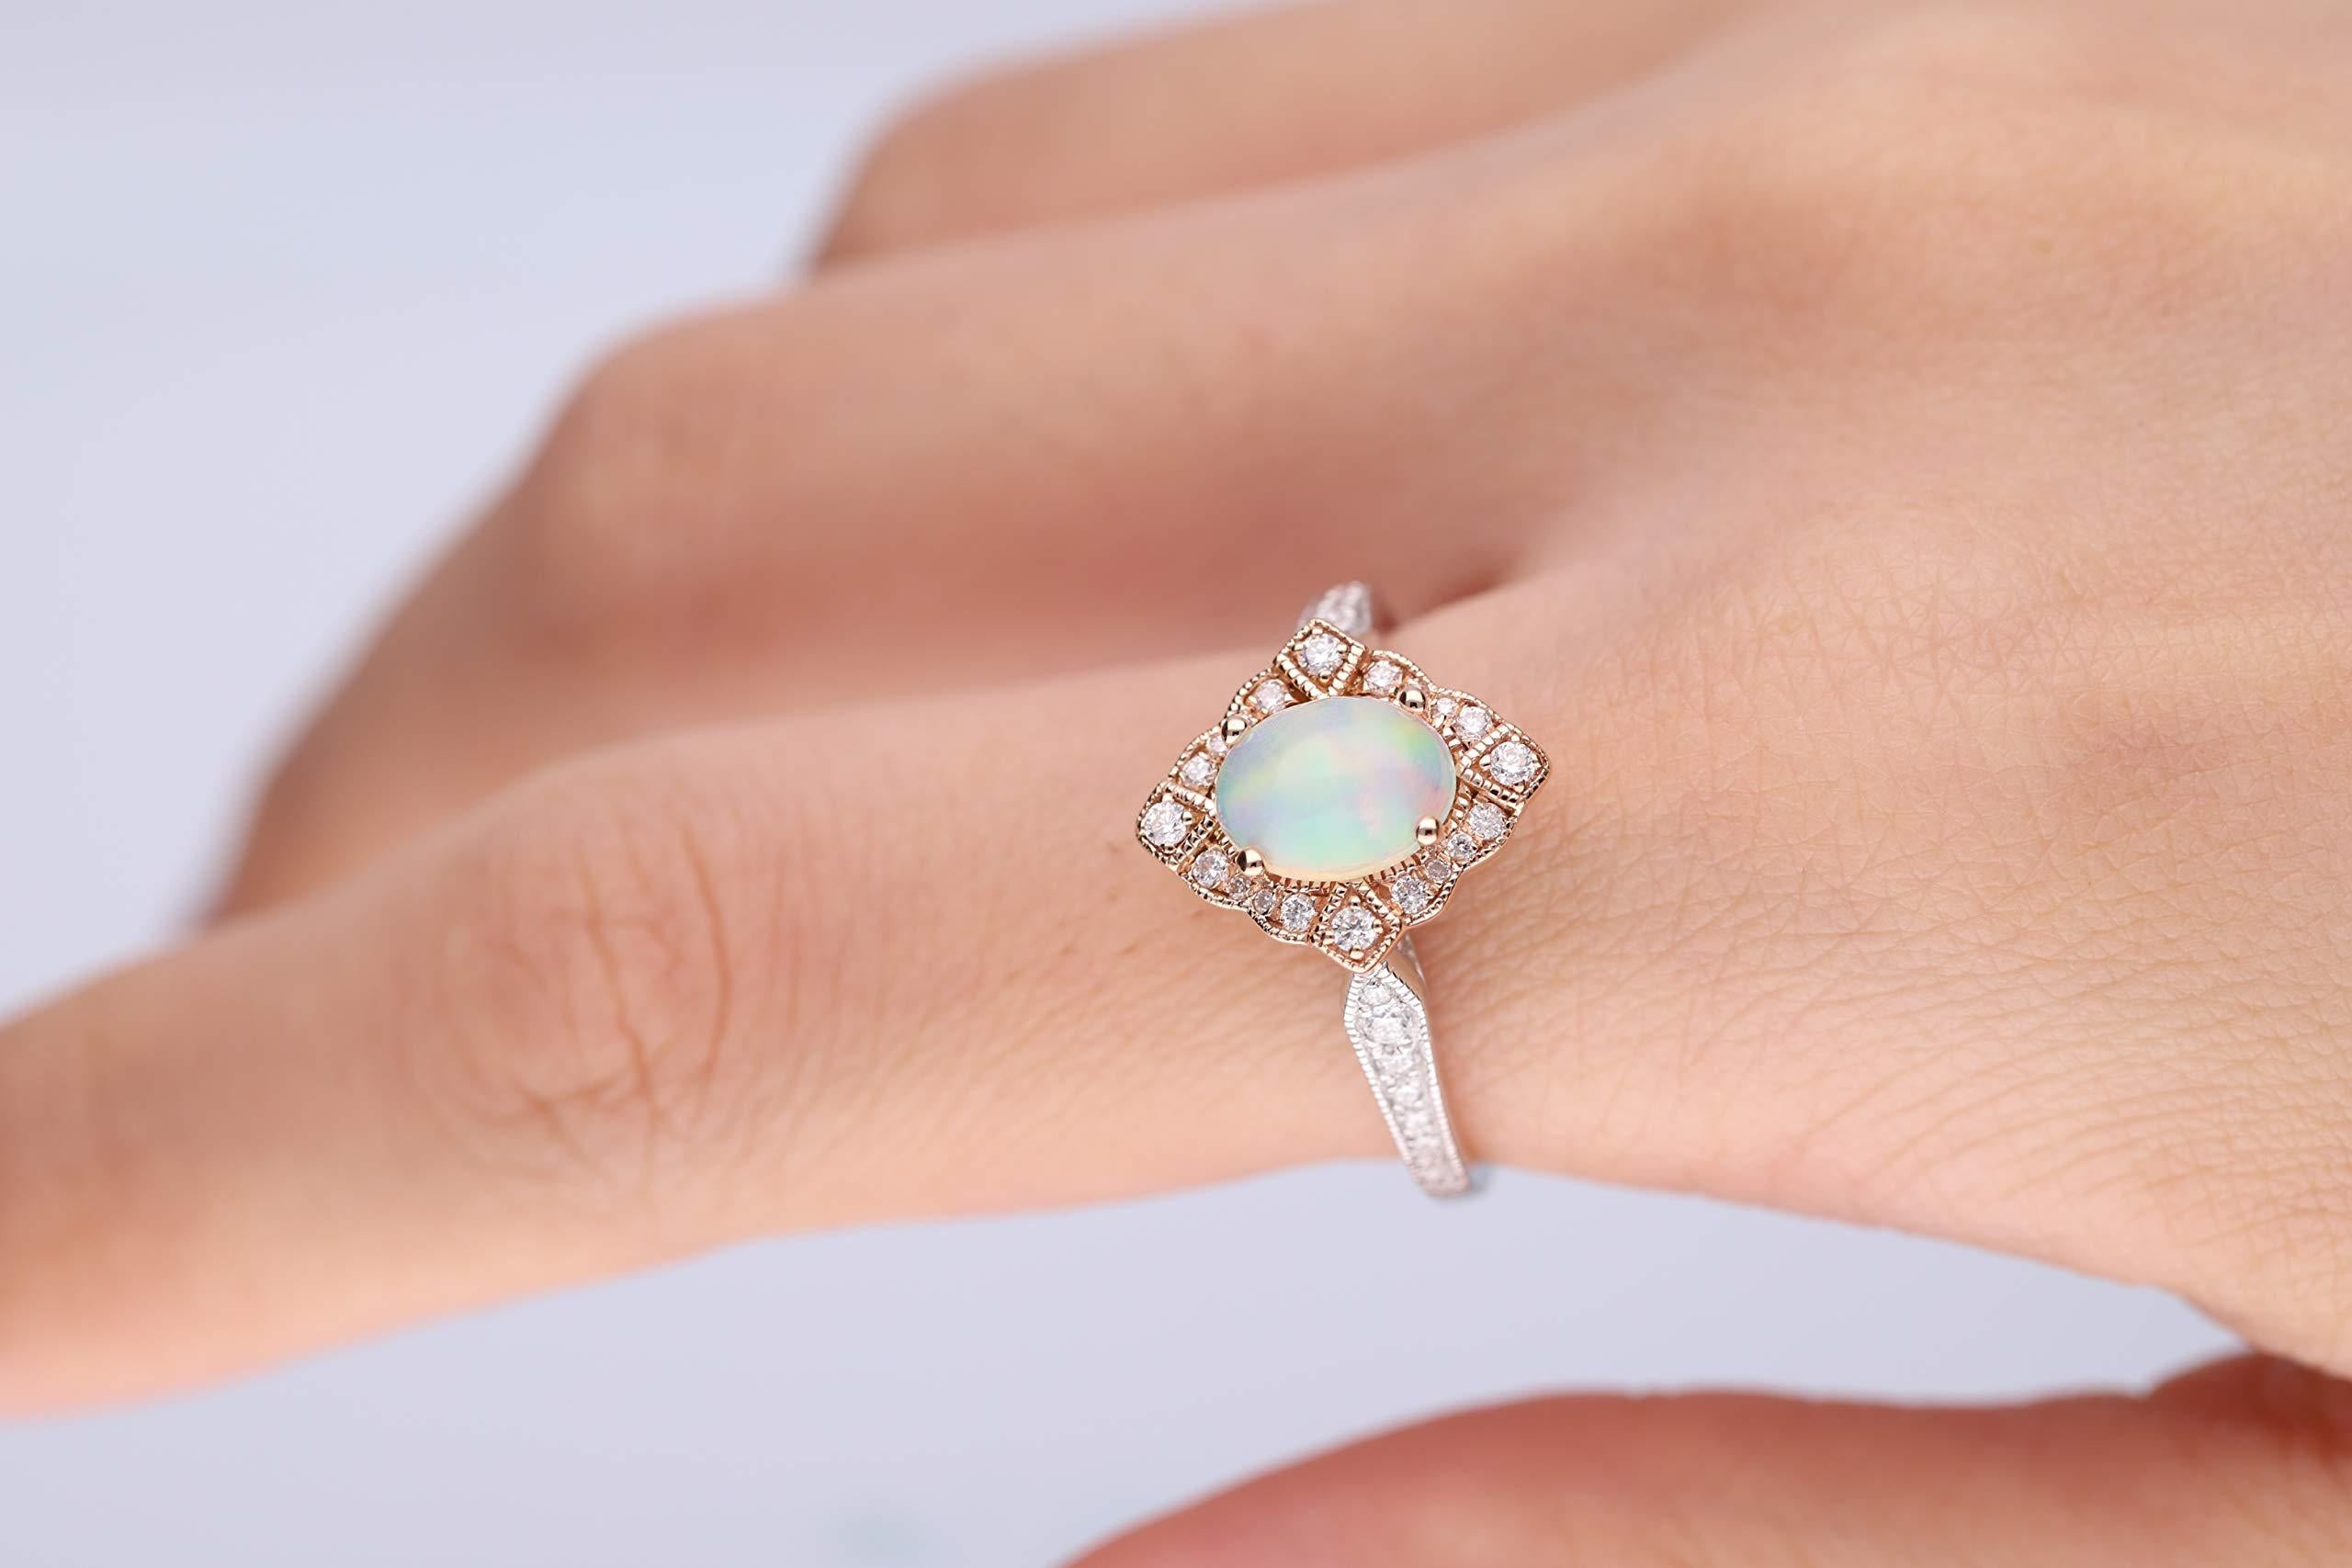 Stunning, timeless and classy eternity Unique ring. Decorate yourself in luxury with this Gin & Grace ring. The 10k Two Tone Gold jewelry boasts 8x6 mm oval cab Ethiopian Opal (1 pcs) 1.0 Carat and Round-Cut Diamond (36 pcs) 0.26 Carat accent stones